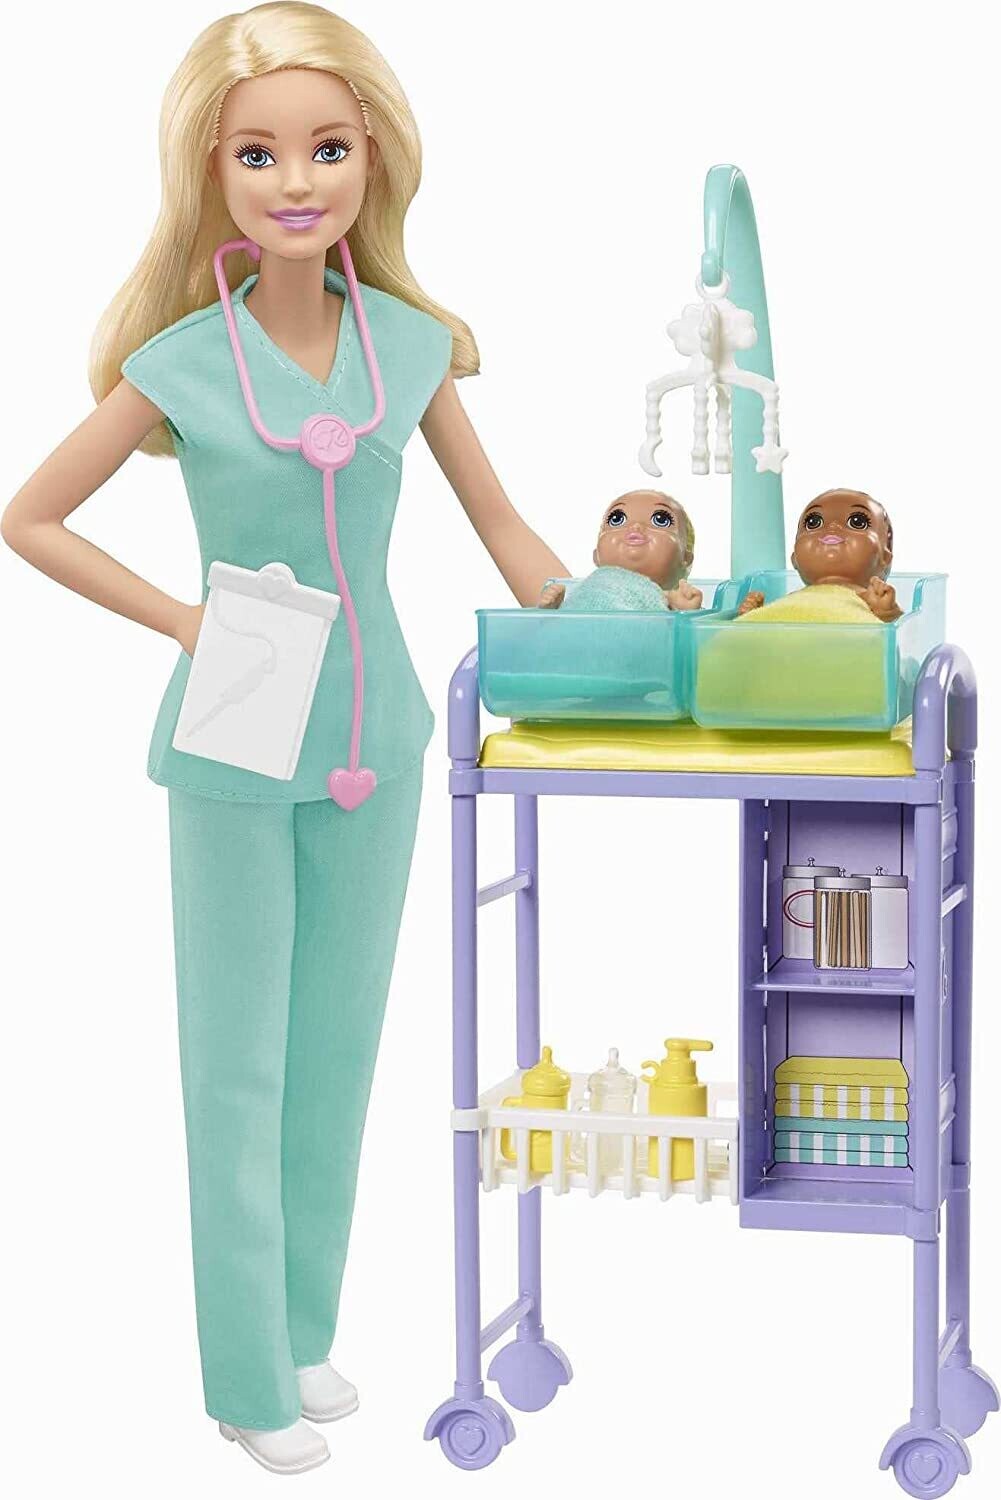 Paediatrician Doll (Brunette) and Play Set with Accessories, Toy from 3 Years